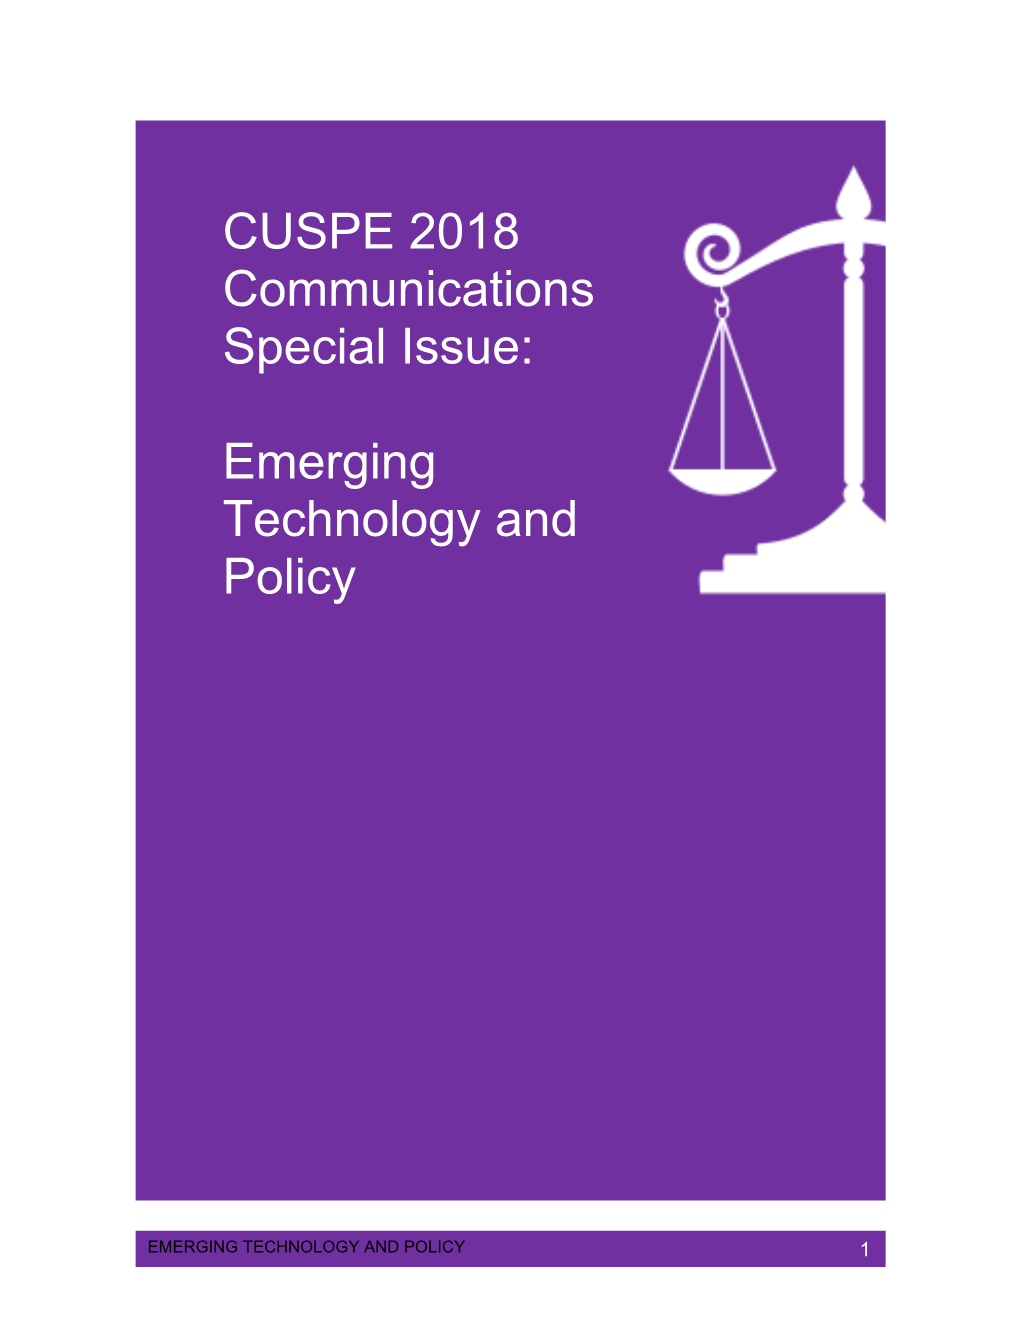 CUSPE 2018 Communications Special Issue: Emerging